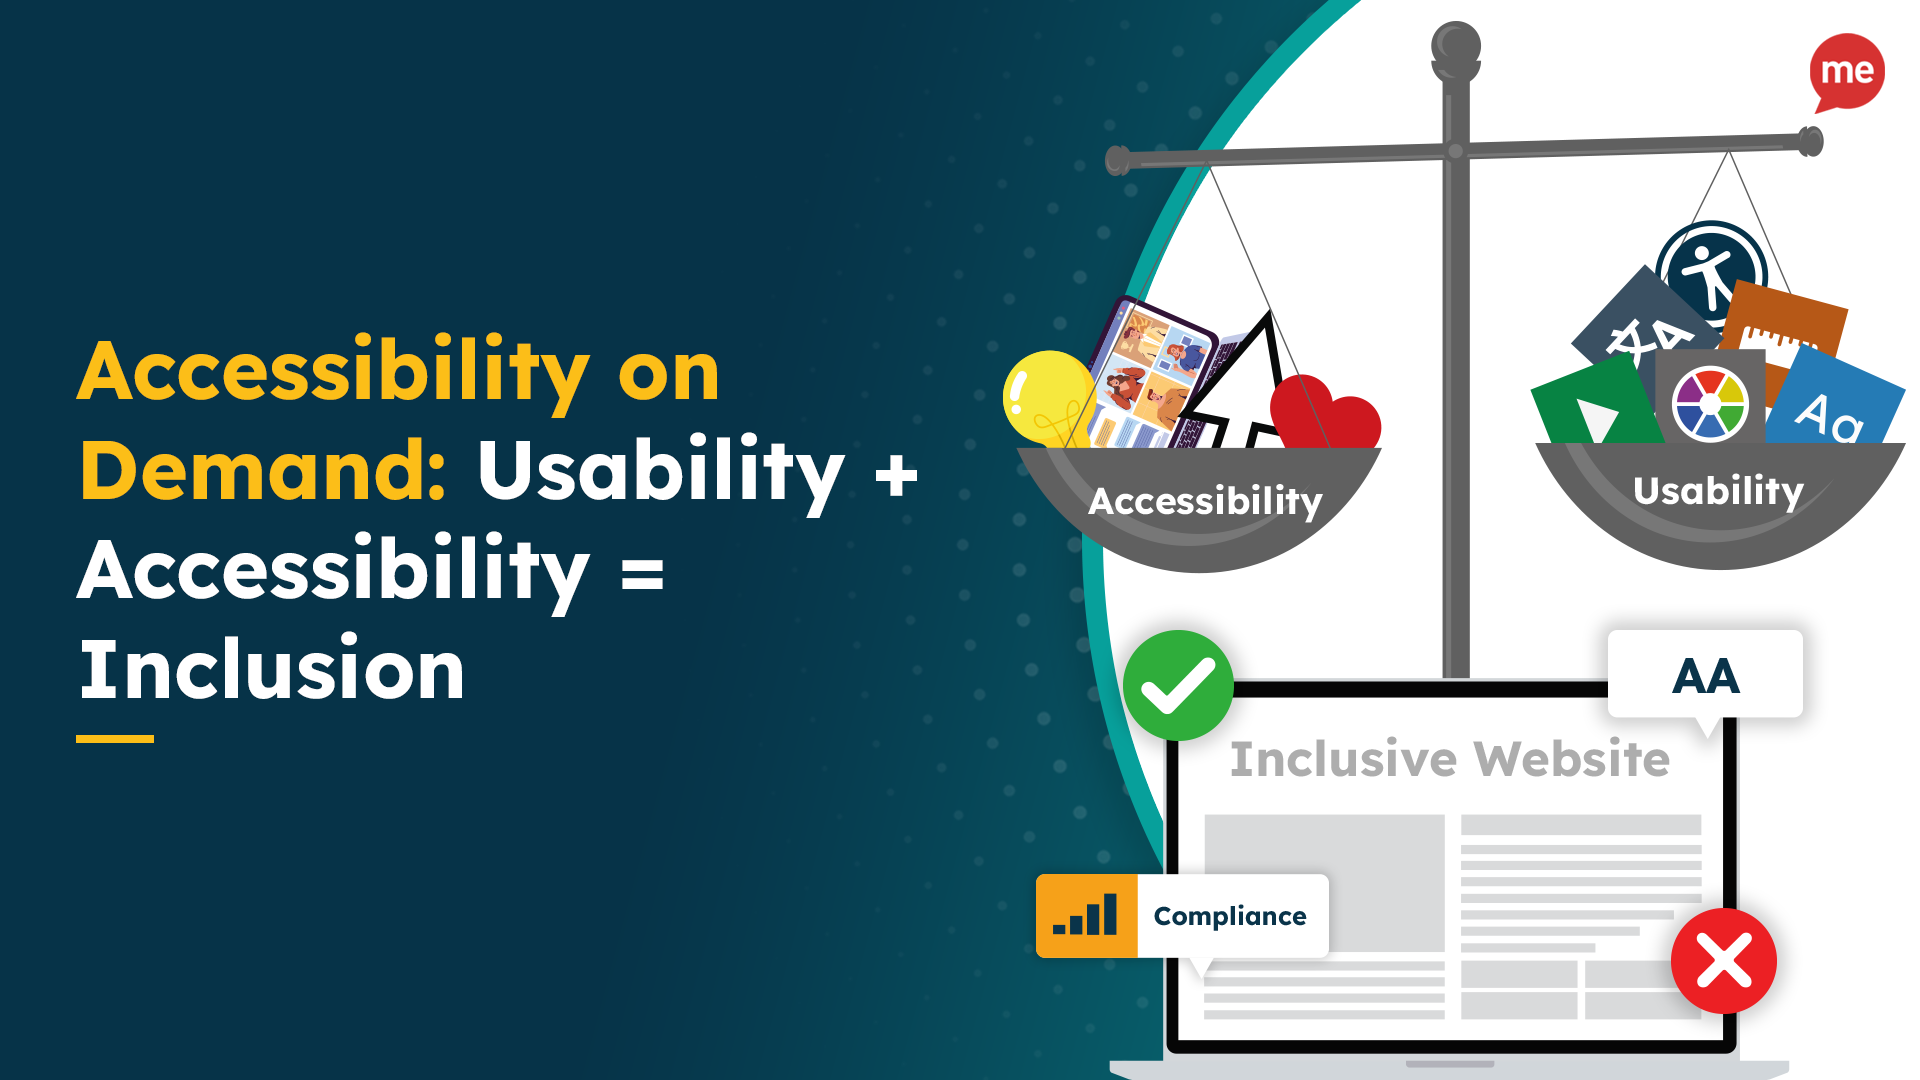 Transform Your Digital Accessibility and Usability, Recite Me Tells All